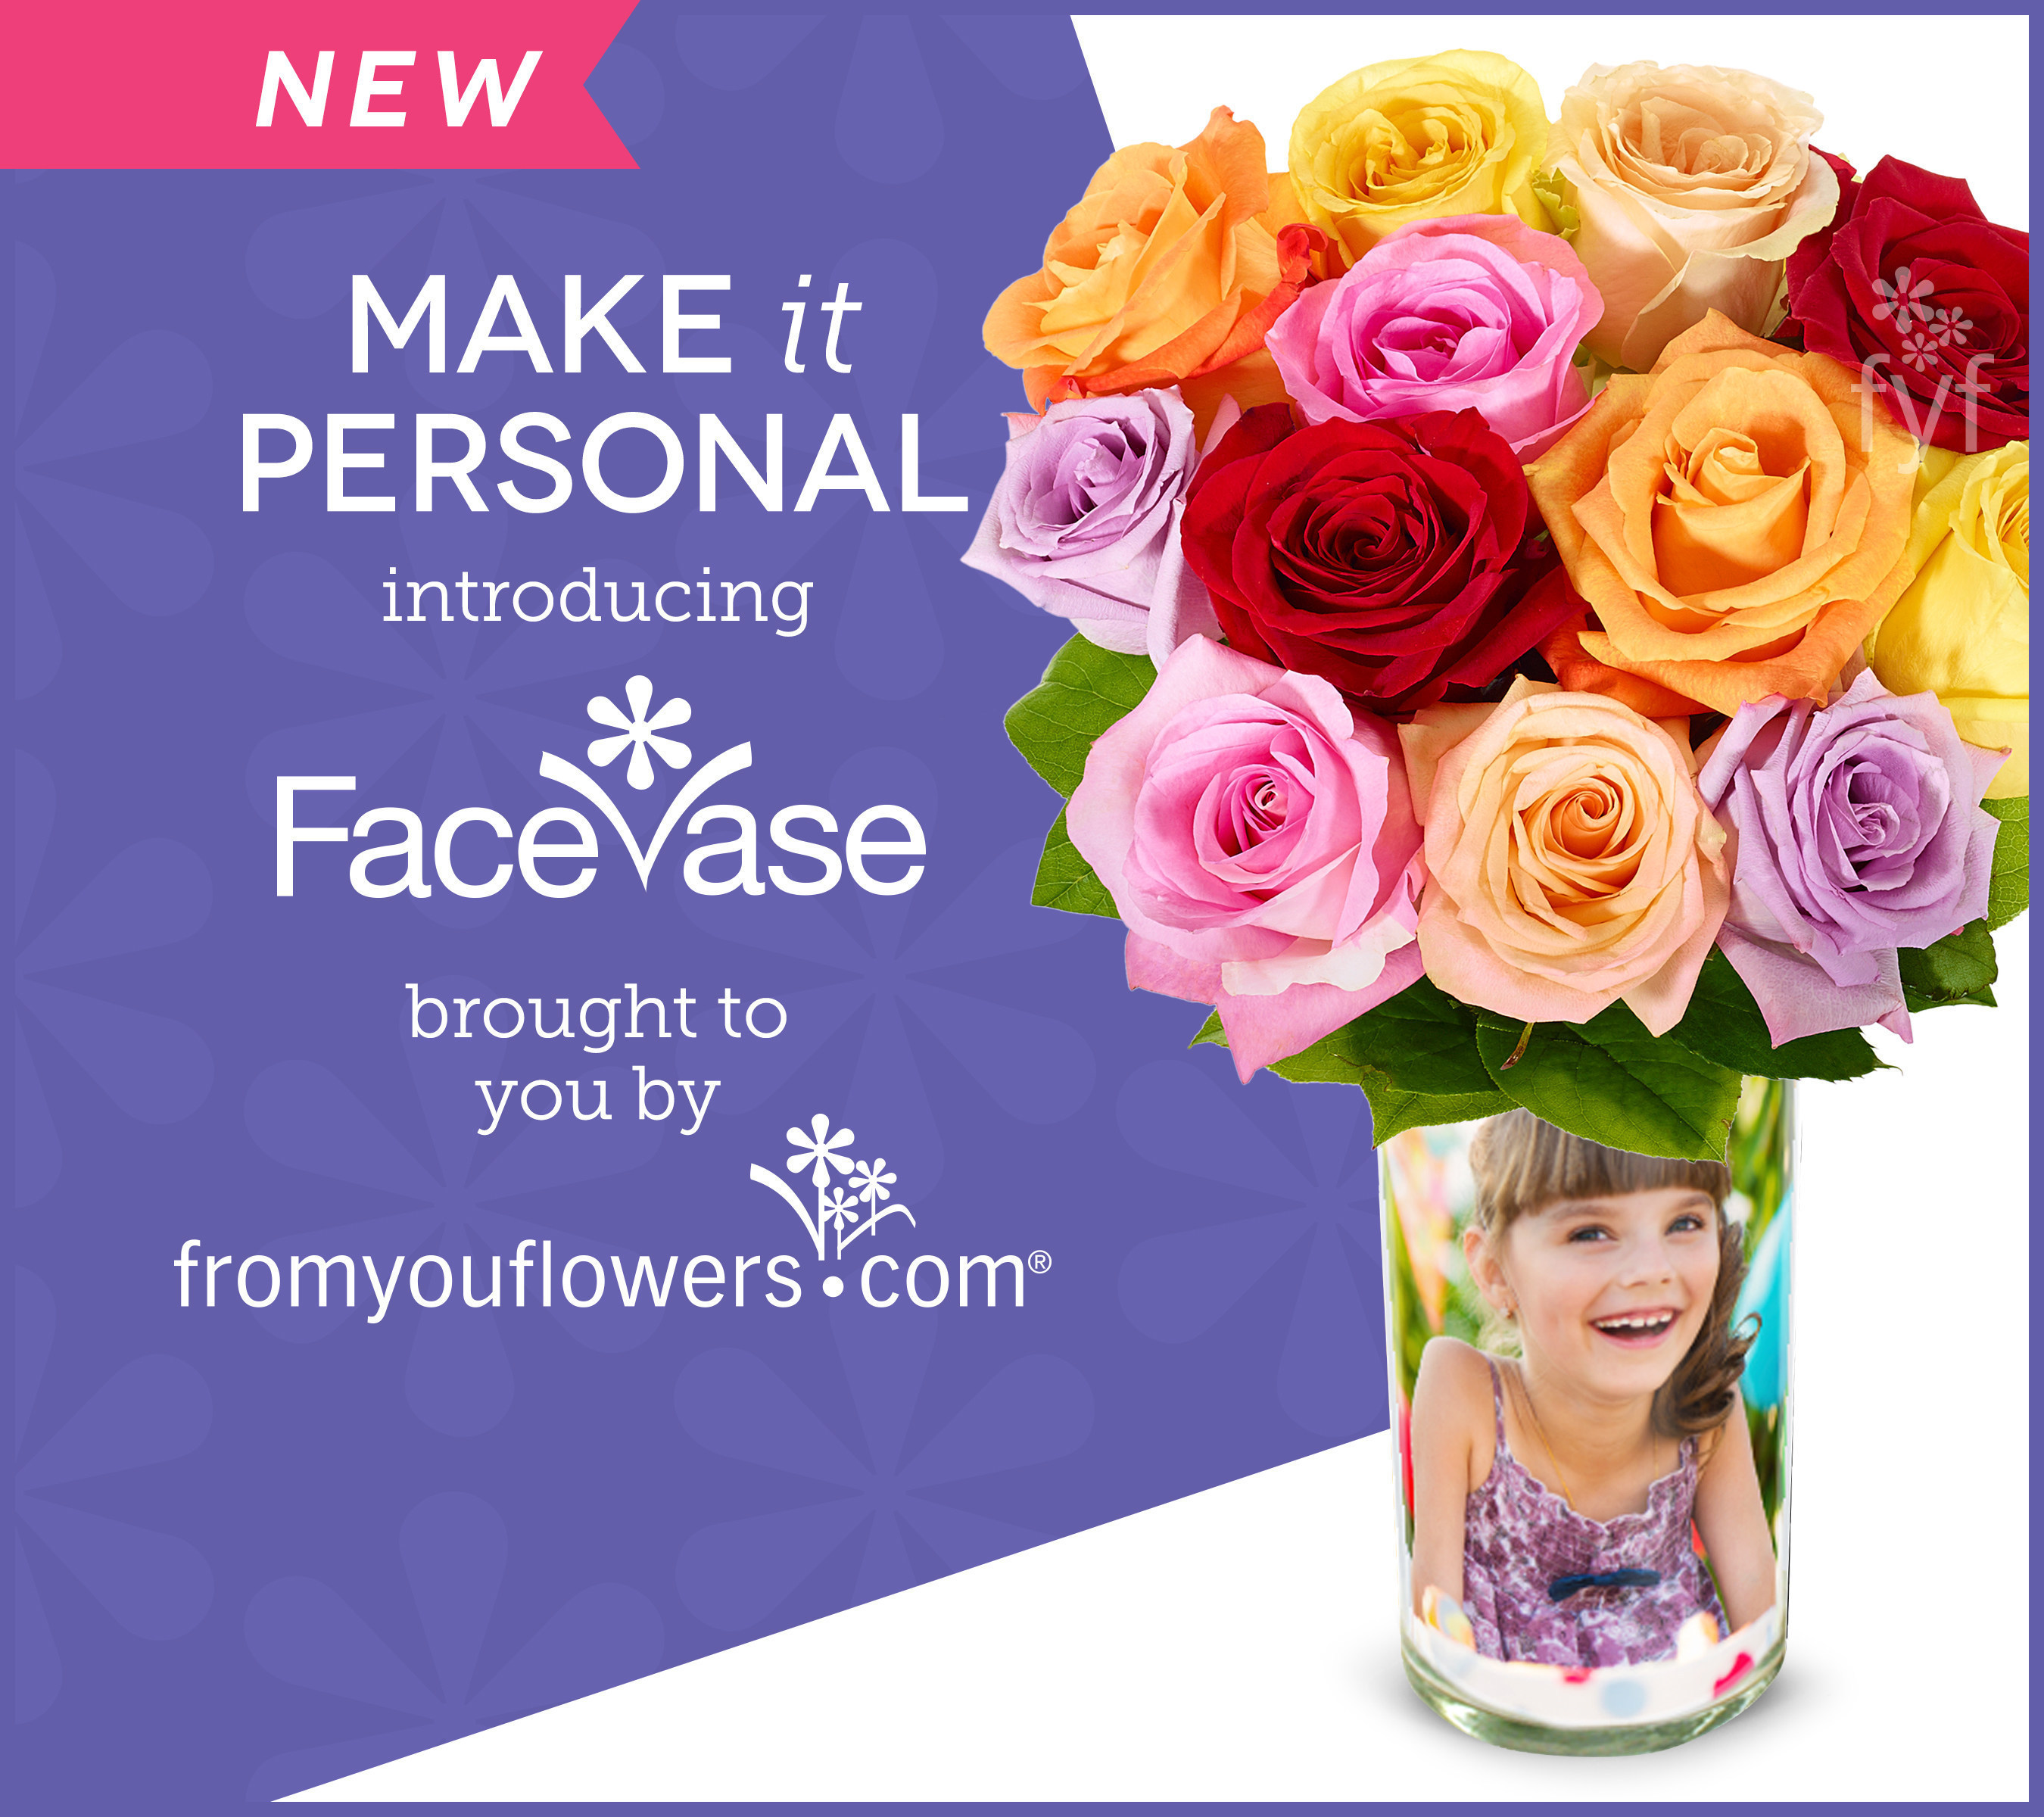 From You Flowers Brings Next Level Personalization to Flower Delivery with FaceVase